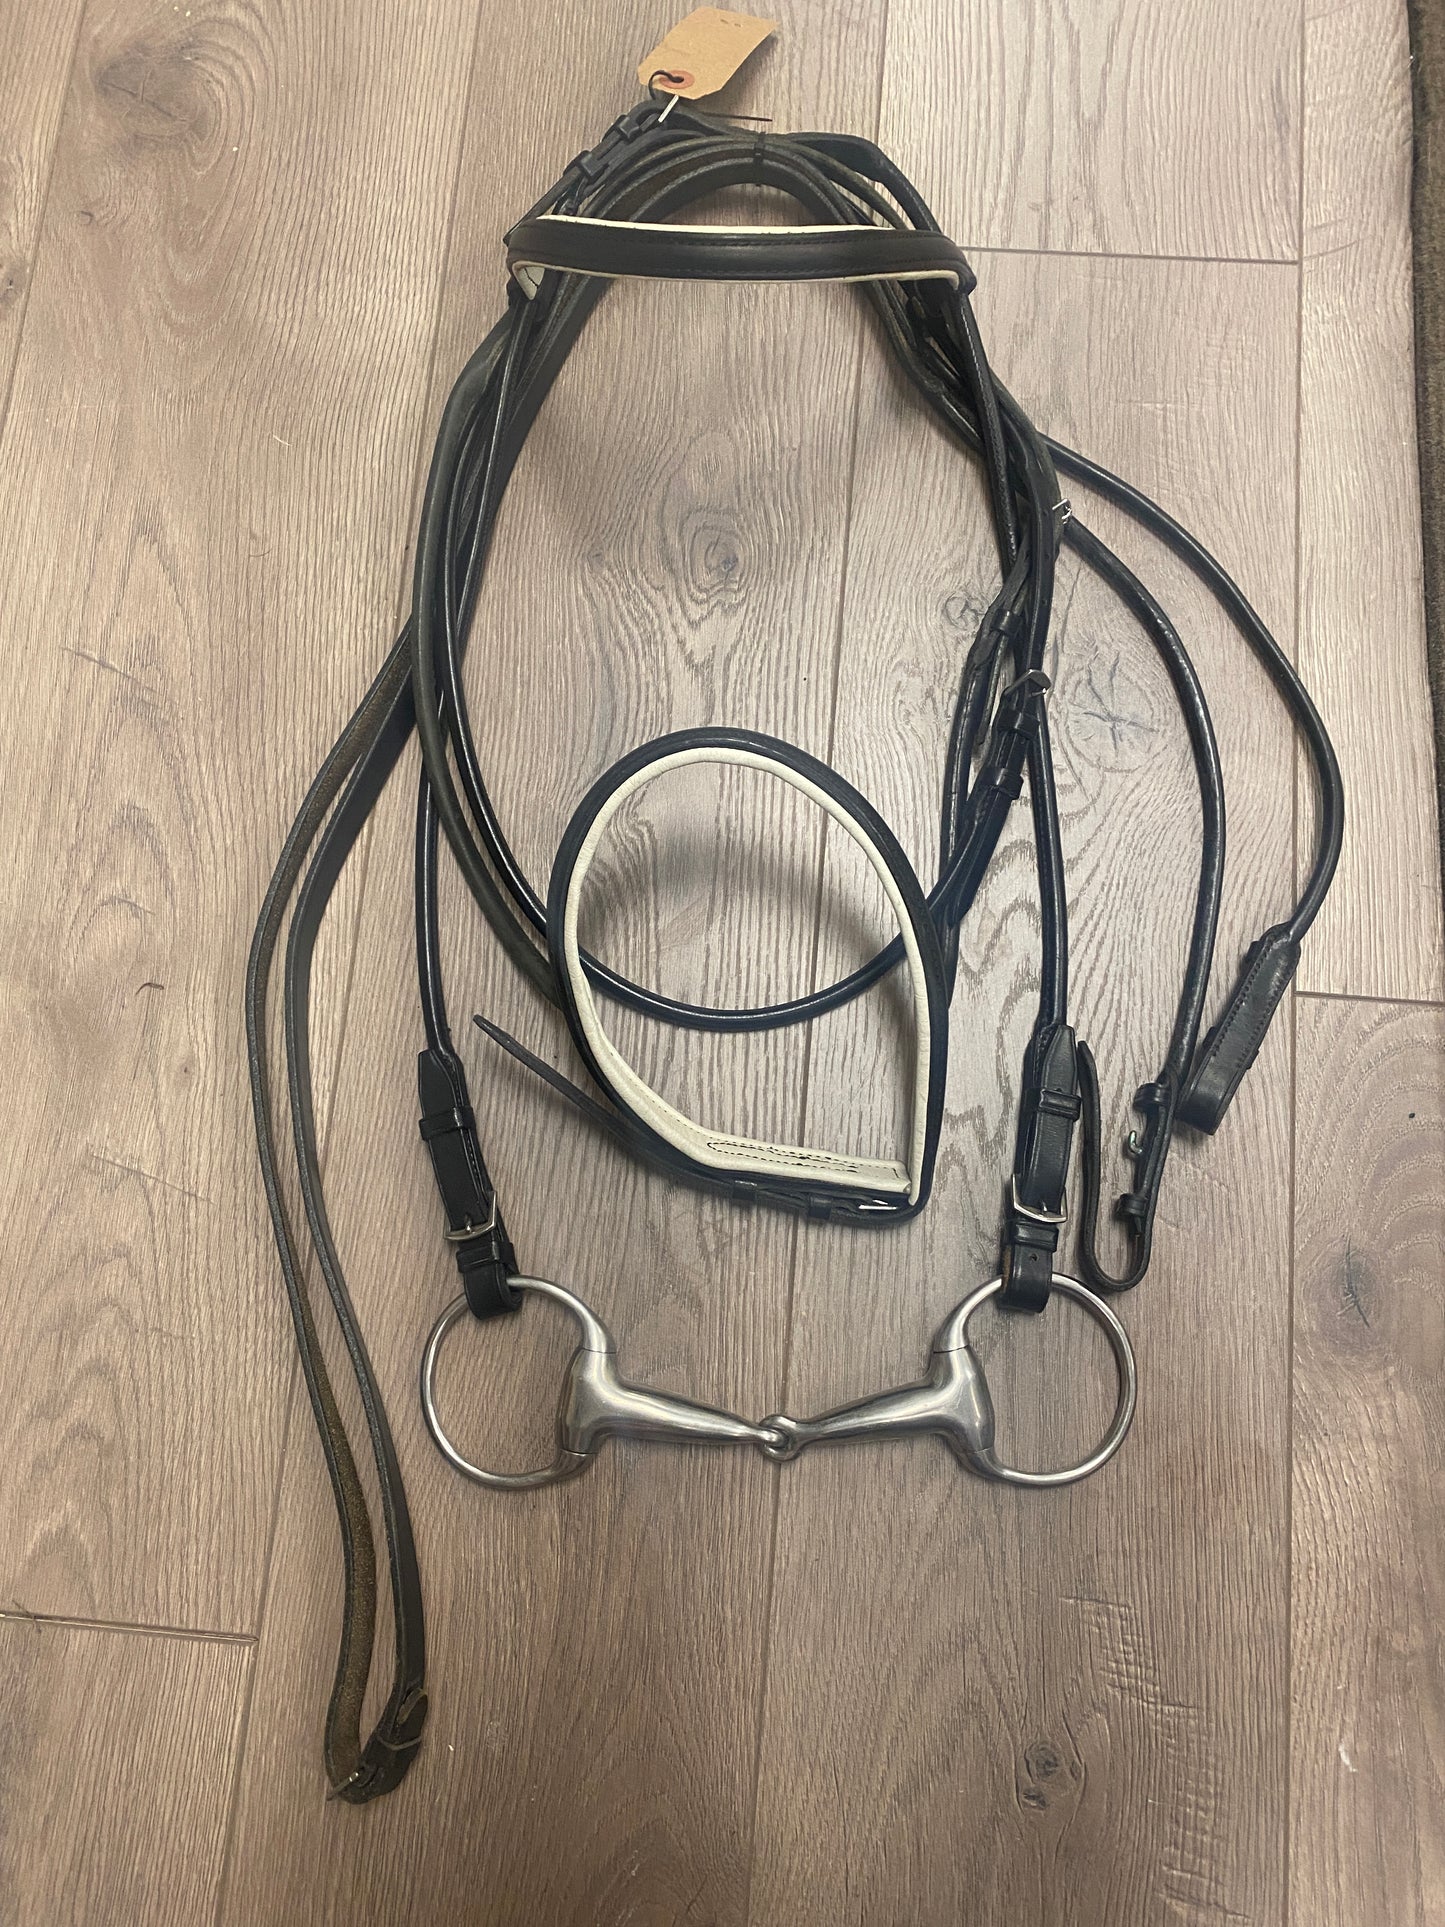 Full/Horse Rolled Black/White Dressage Bridle with Reins